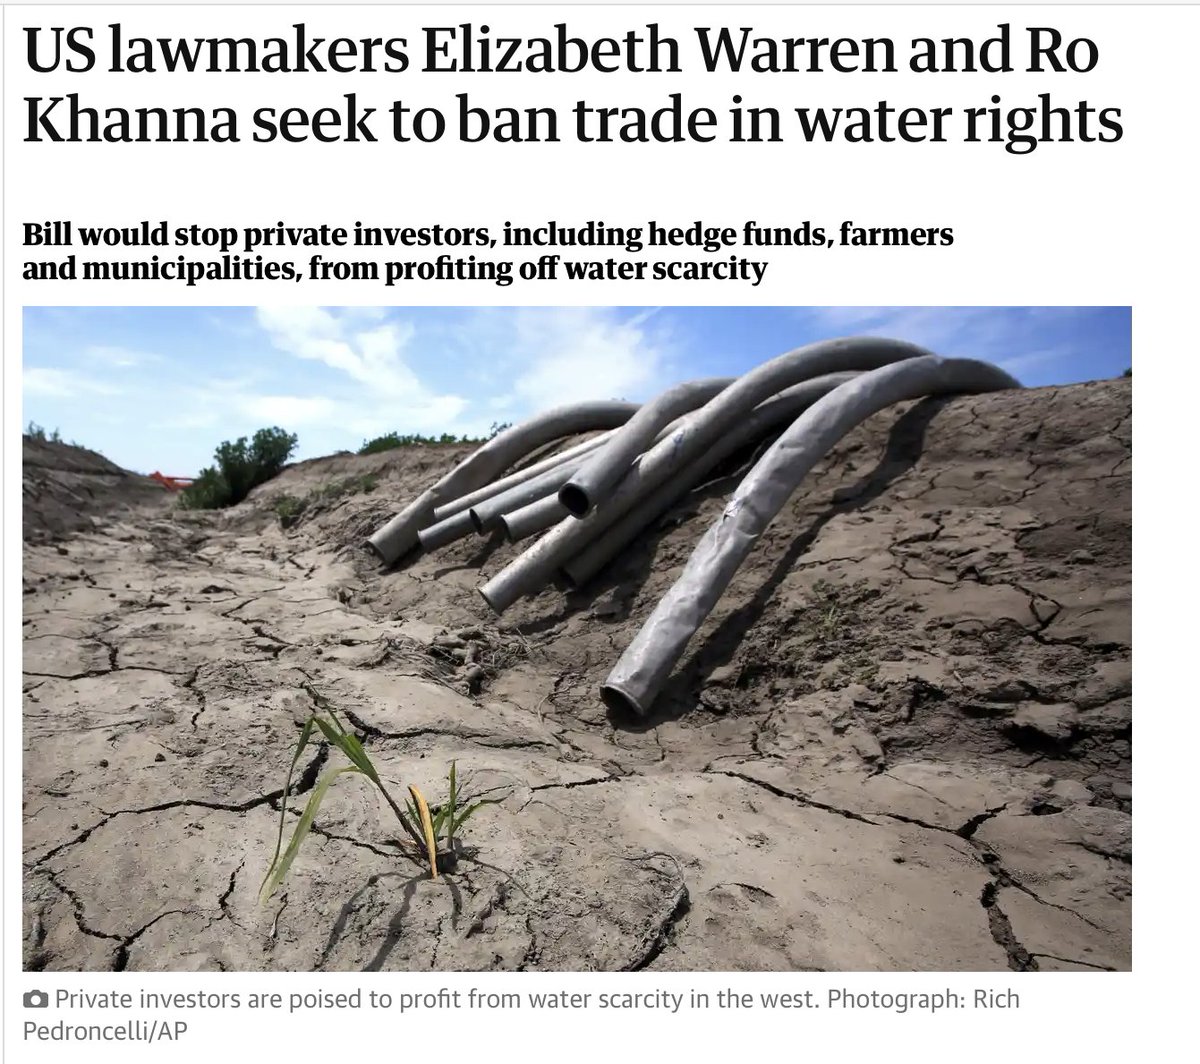 It's better for water to be owned privately. 

Owners are incentivized to protect it and profit from it. Paying for water make users reduce waste.

Government ownership only politicizes water. @RoKhanna 

theguardian.com/environment/20…